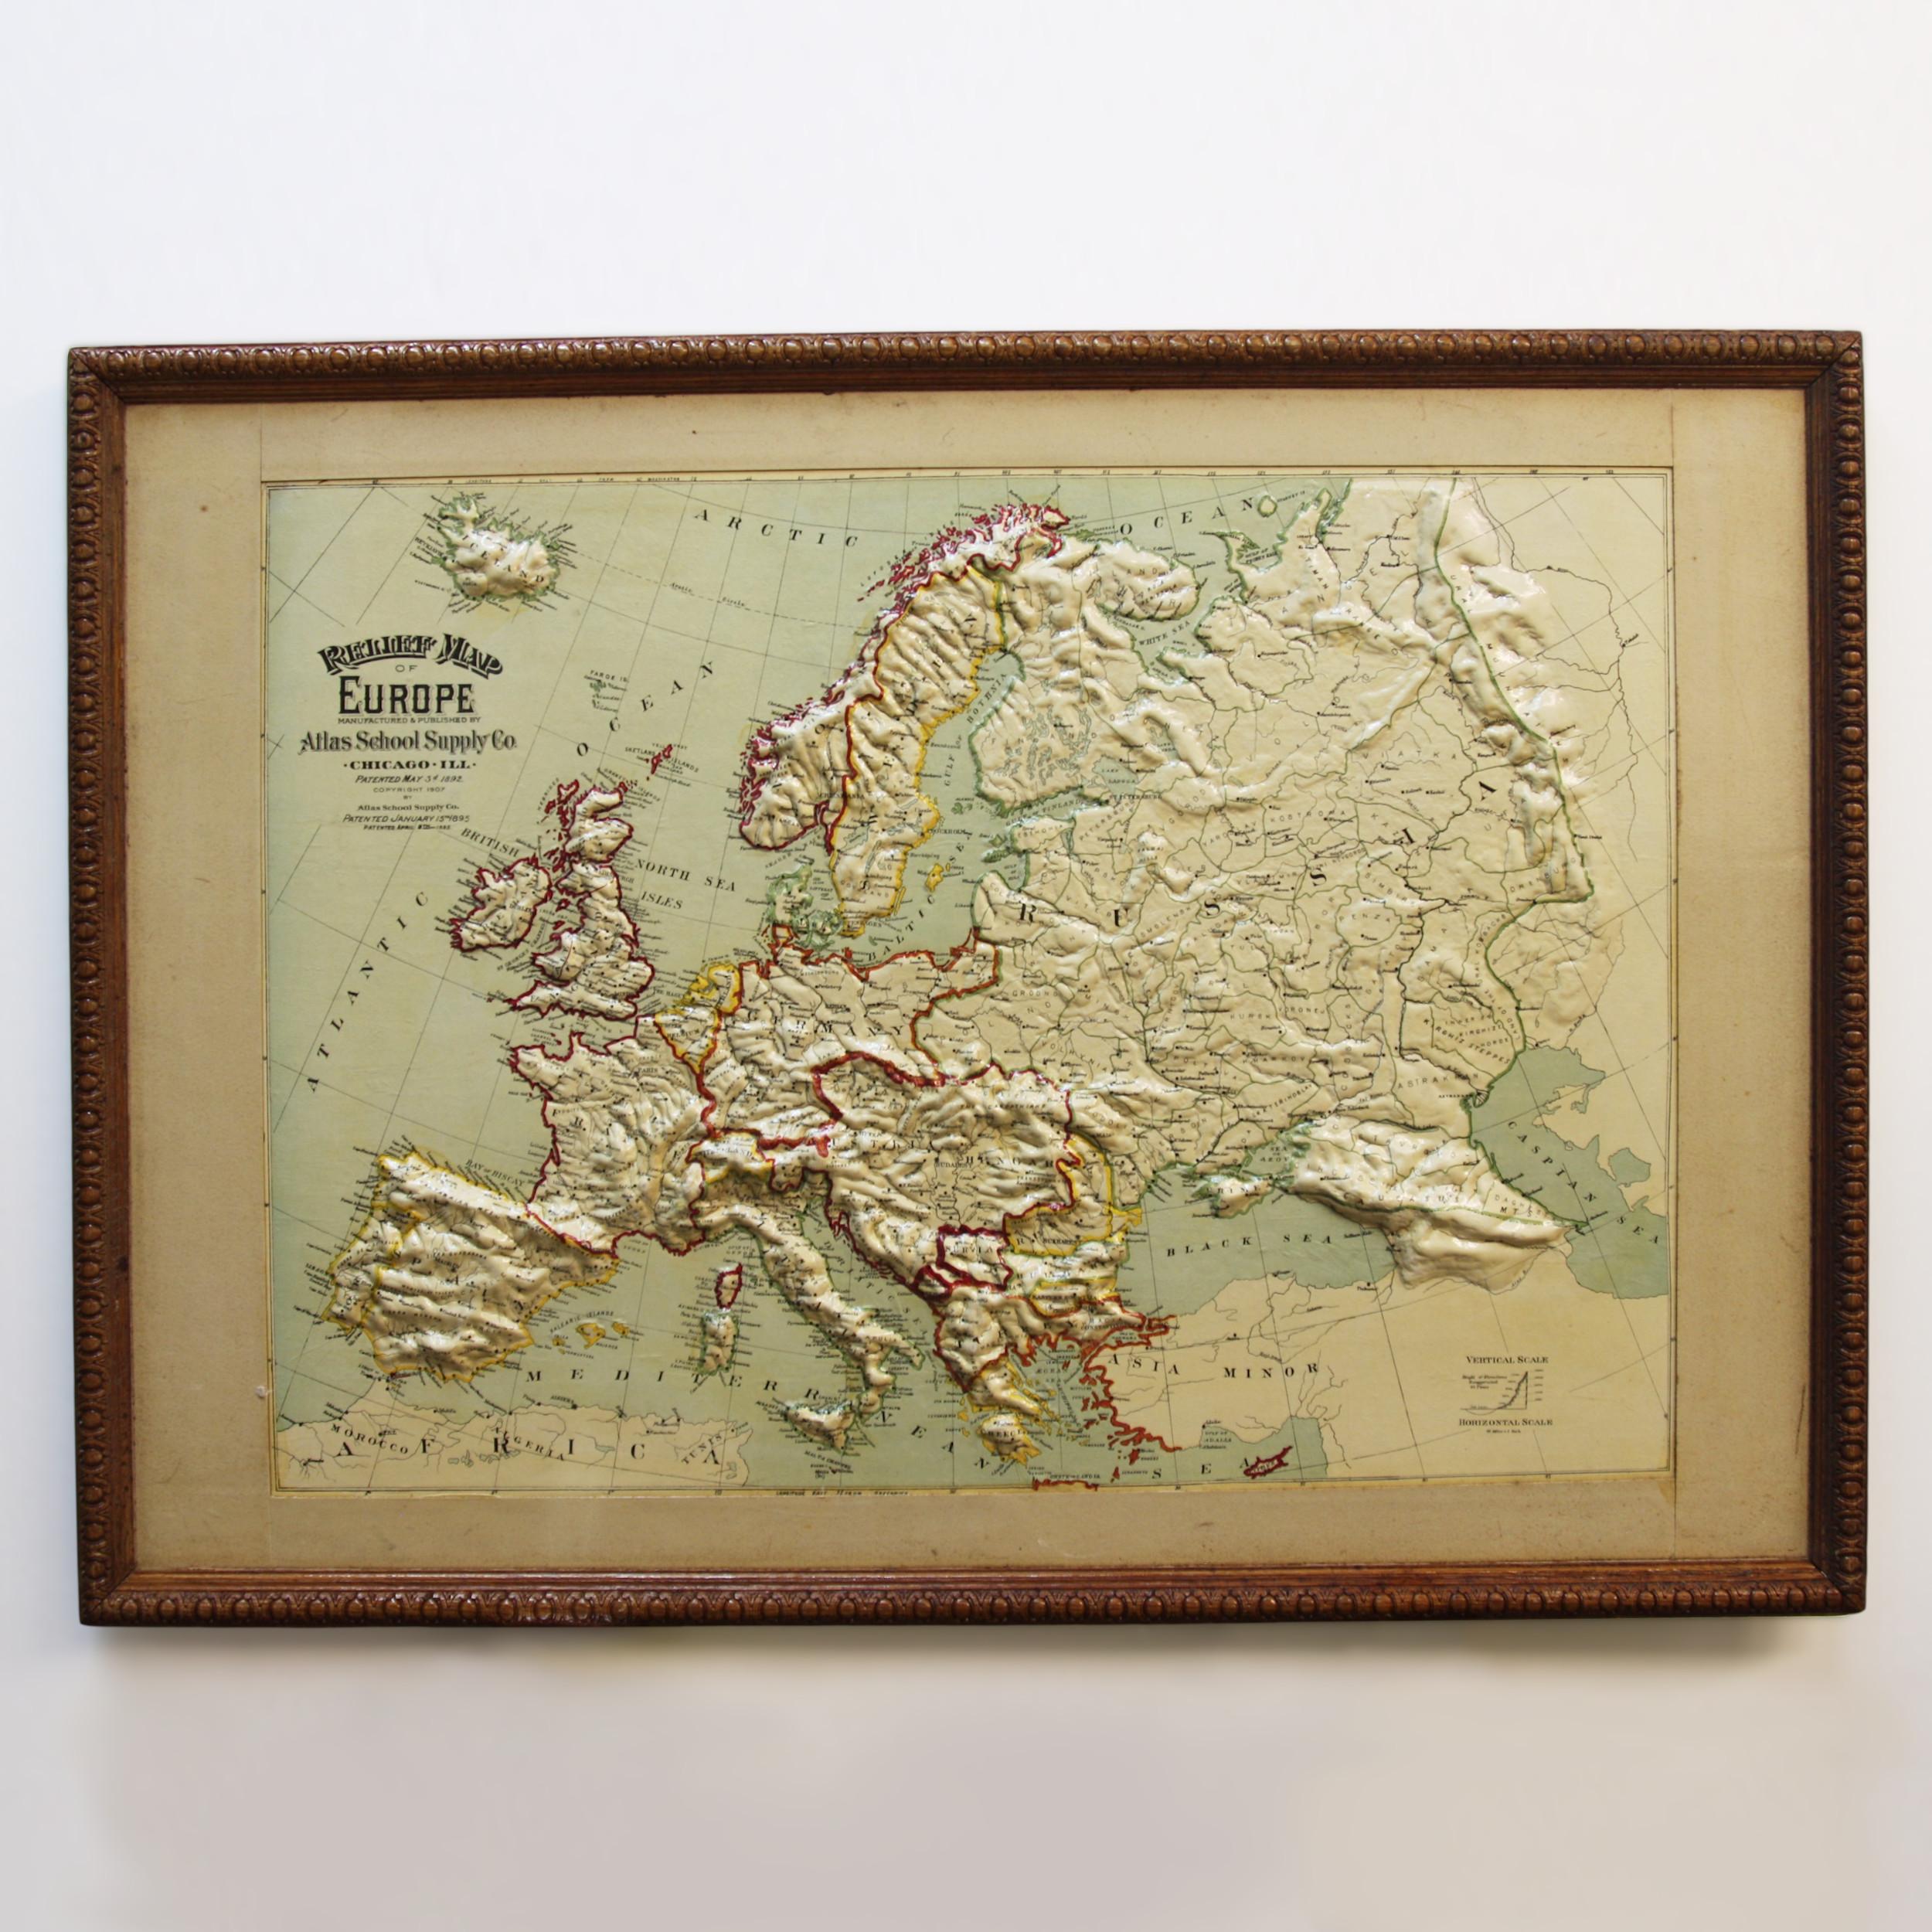 Remarkably original, 1907 Relief map of Europe by the Atlas School Supply Co. of Chicago, Illinois. This exceptional quality map features its original oak frame, heavy-duty stretcher, bold graphics and beautifully molded 3-D papier-mâché topography.